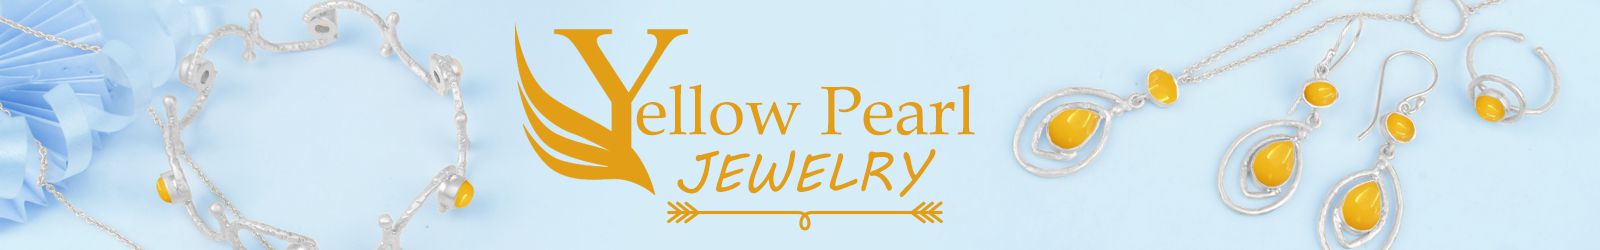 Silver Yellow Pearl Jewelry Wholesale Supplier